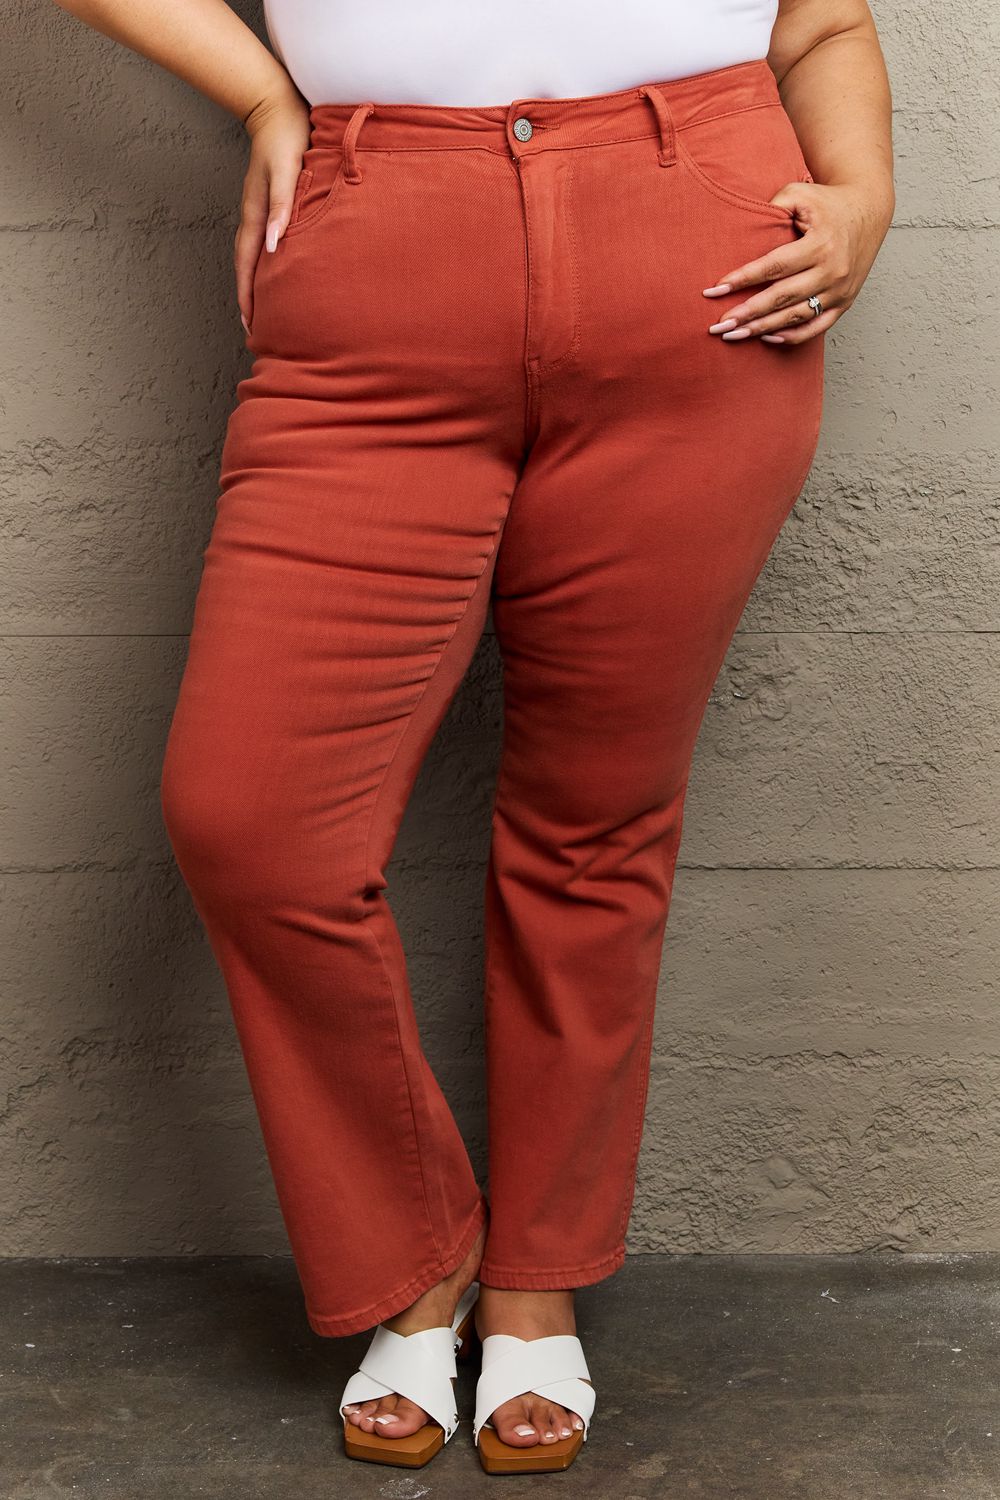 Judy Blue Olivia Full Size Mid Rise Slim Bootcut Jeans in Terracotta